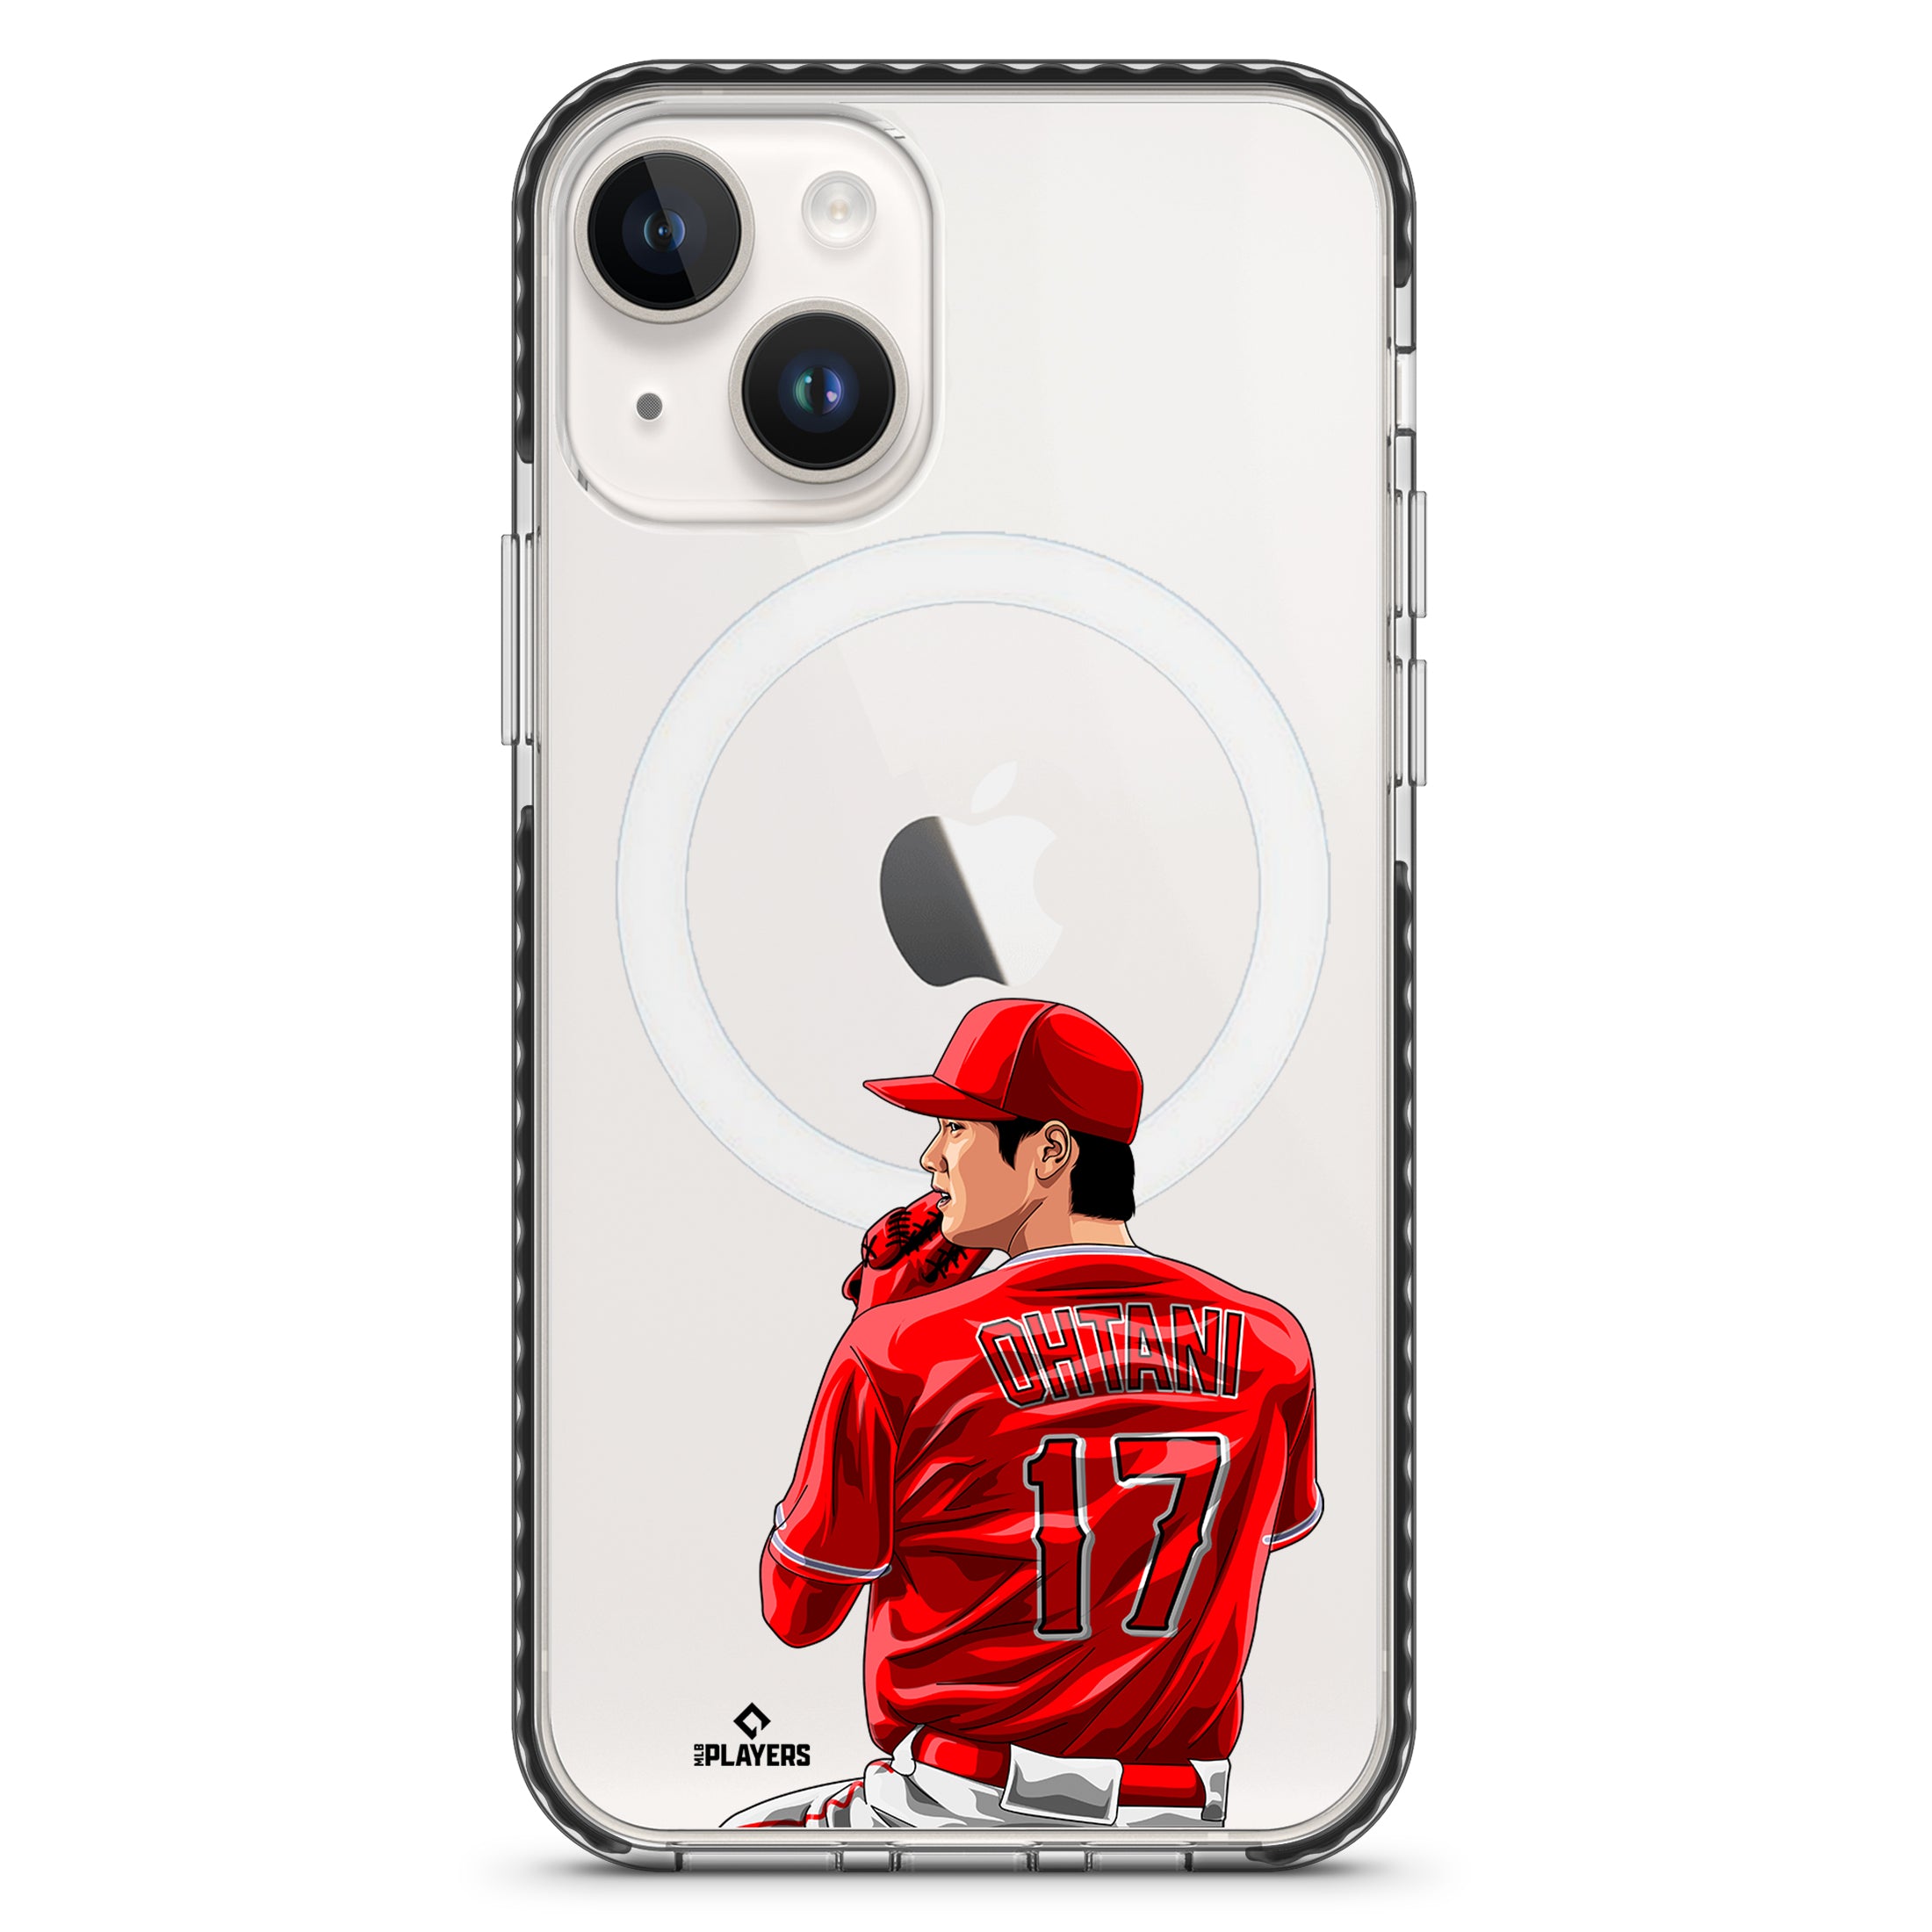 Ohtani Pitching Clear Series 2.0 Phone Case